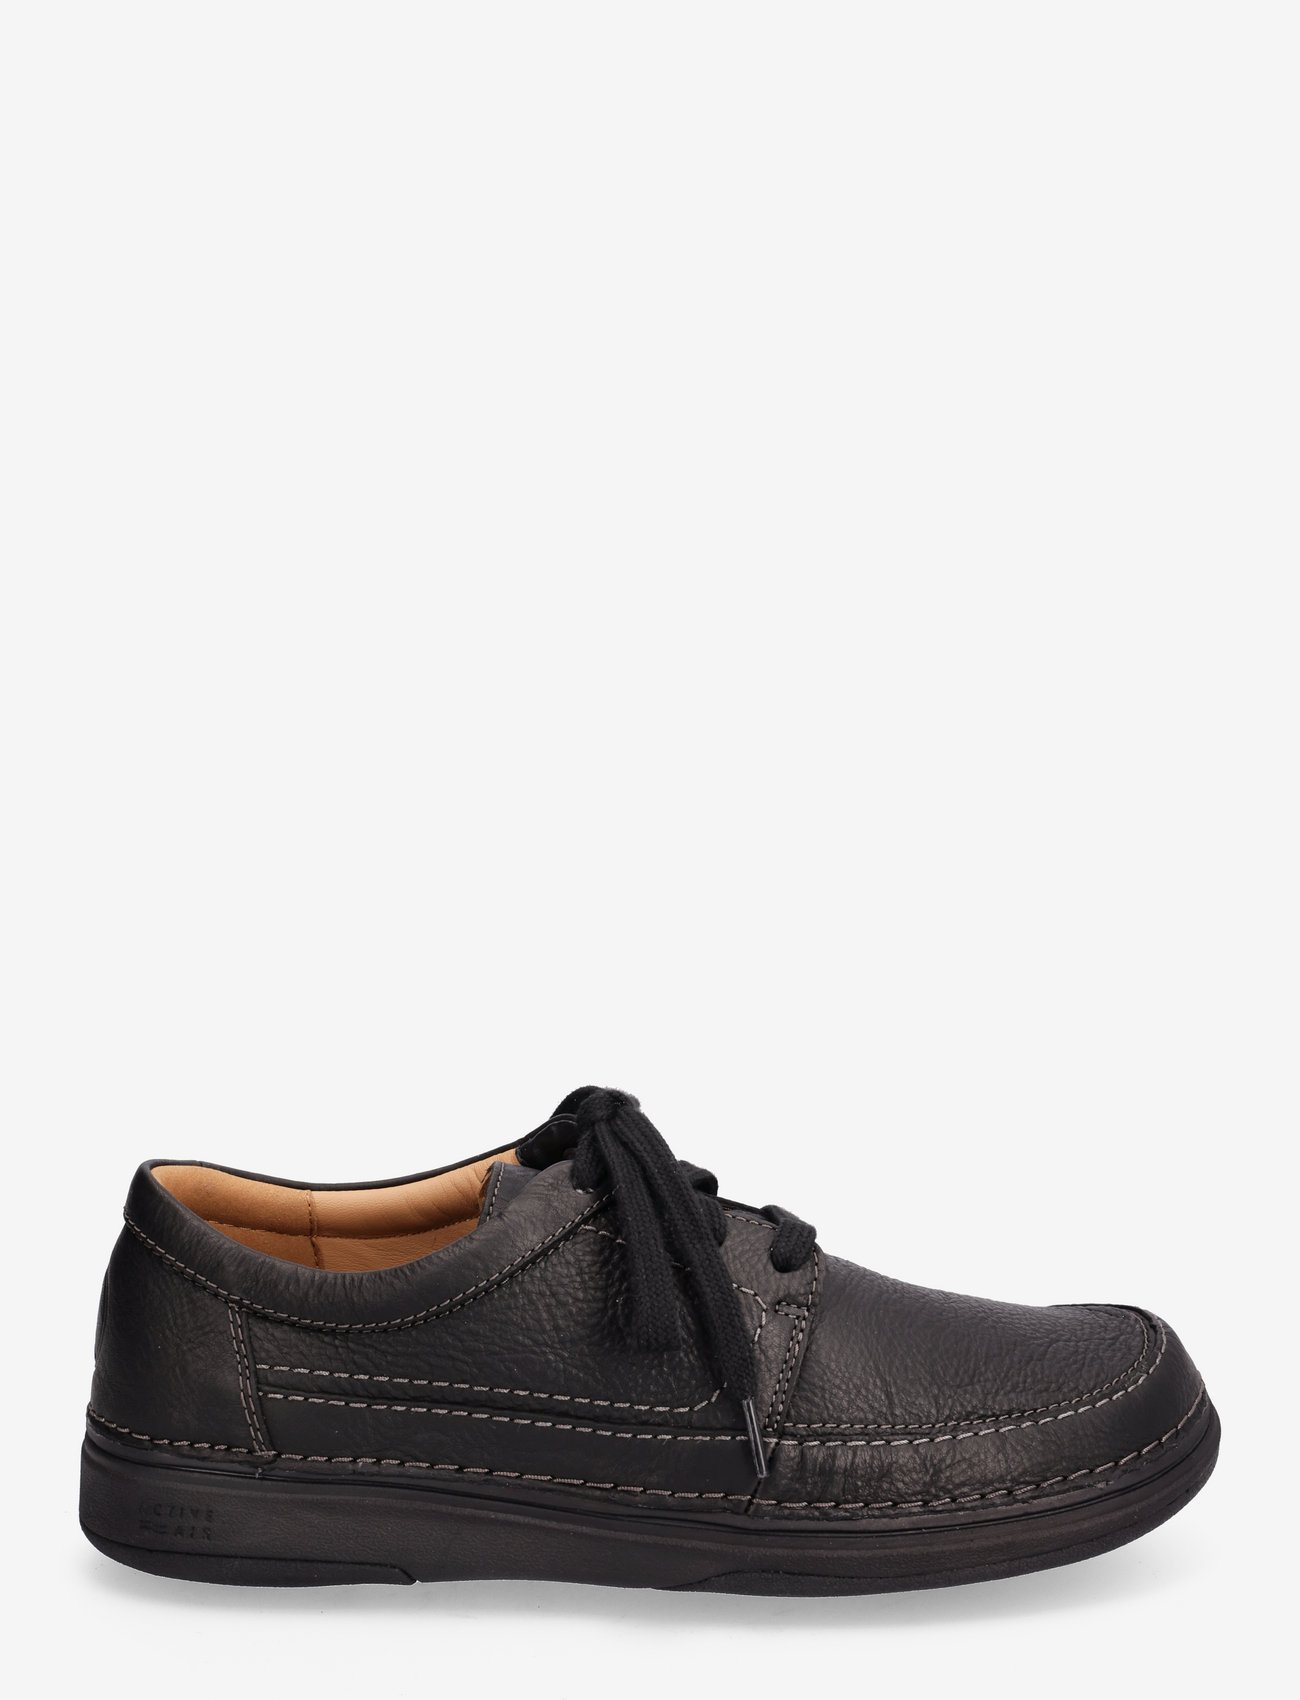 Clarks - Nature 5 Lo - black leather - 1